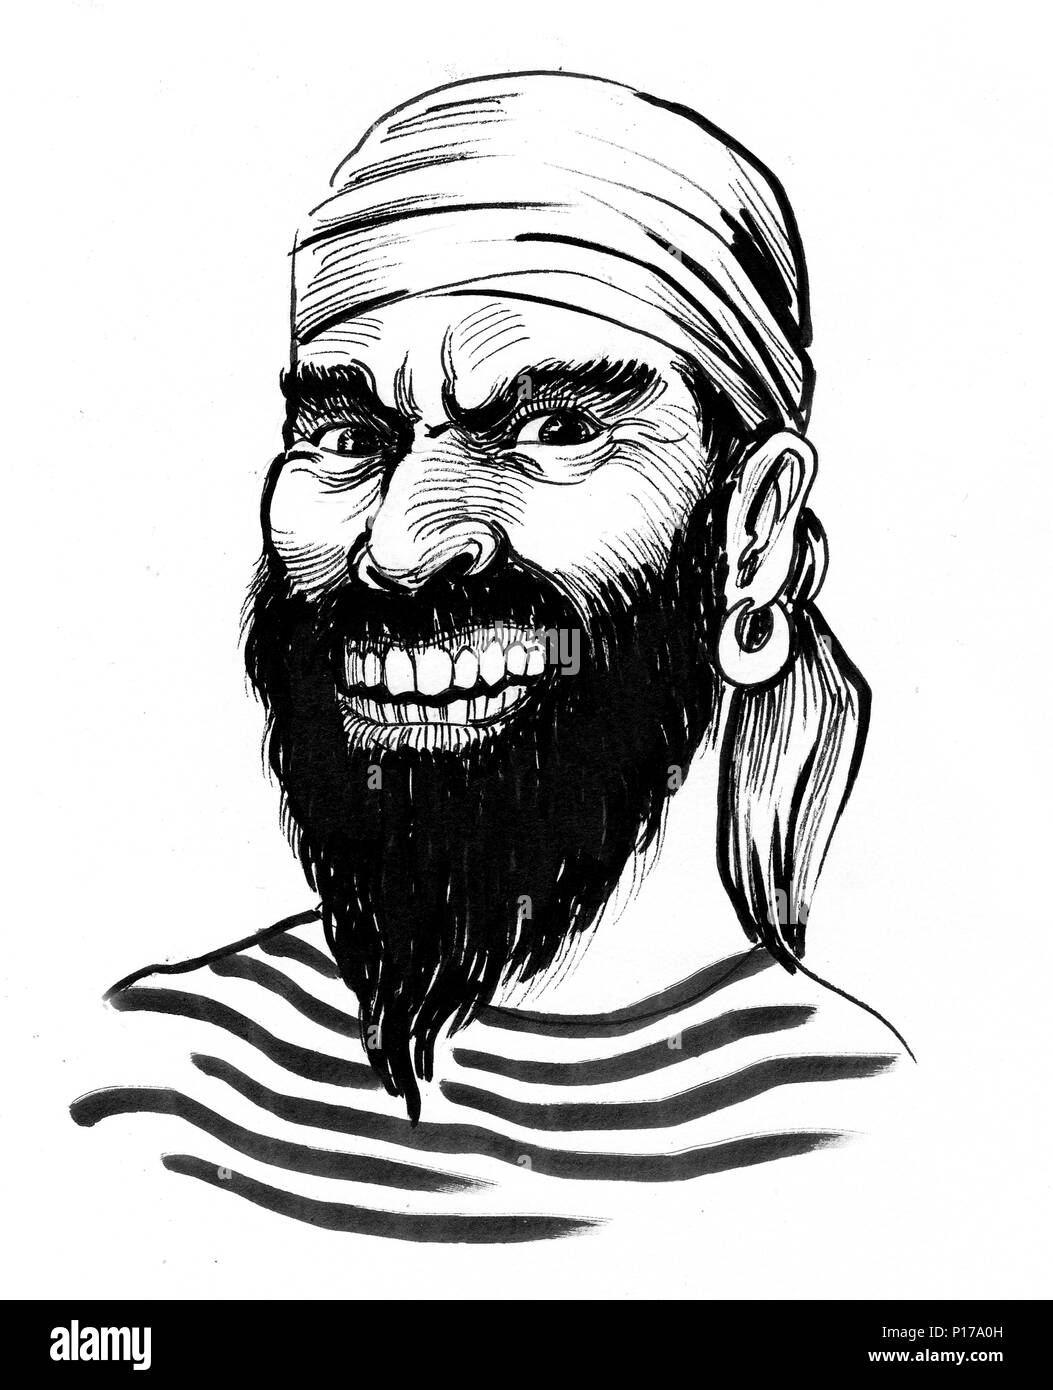 Mad pirate face. Ink black and white drawing Stock Photo